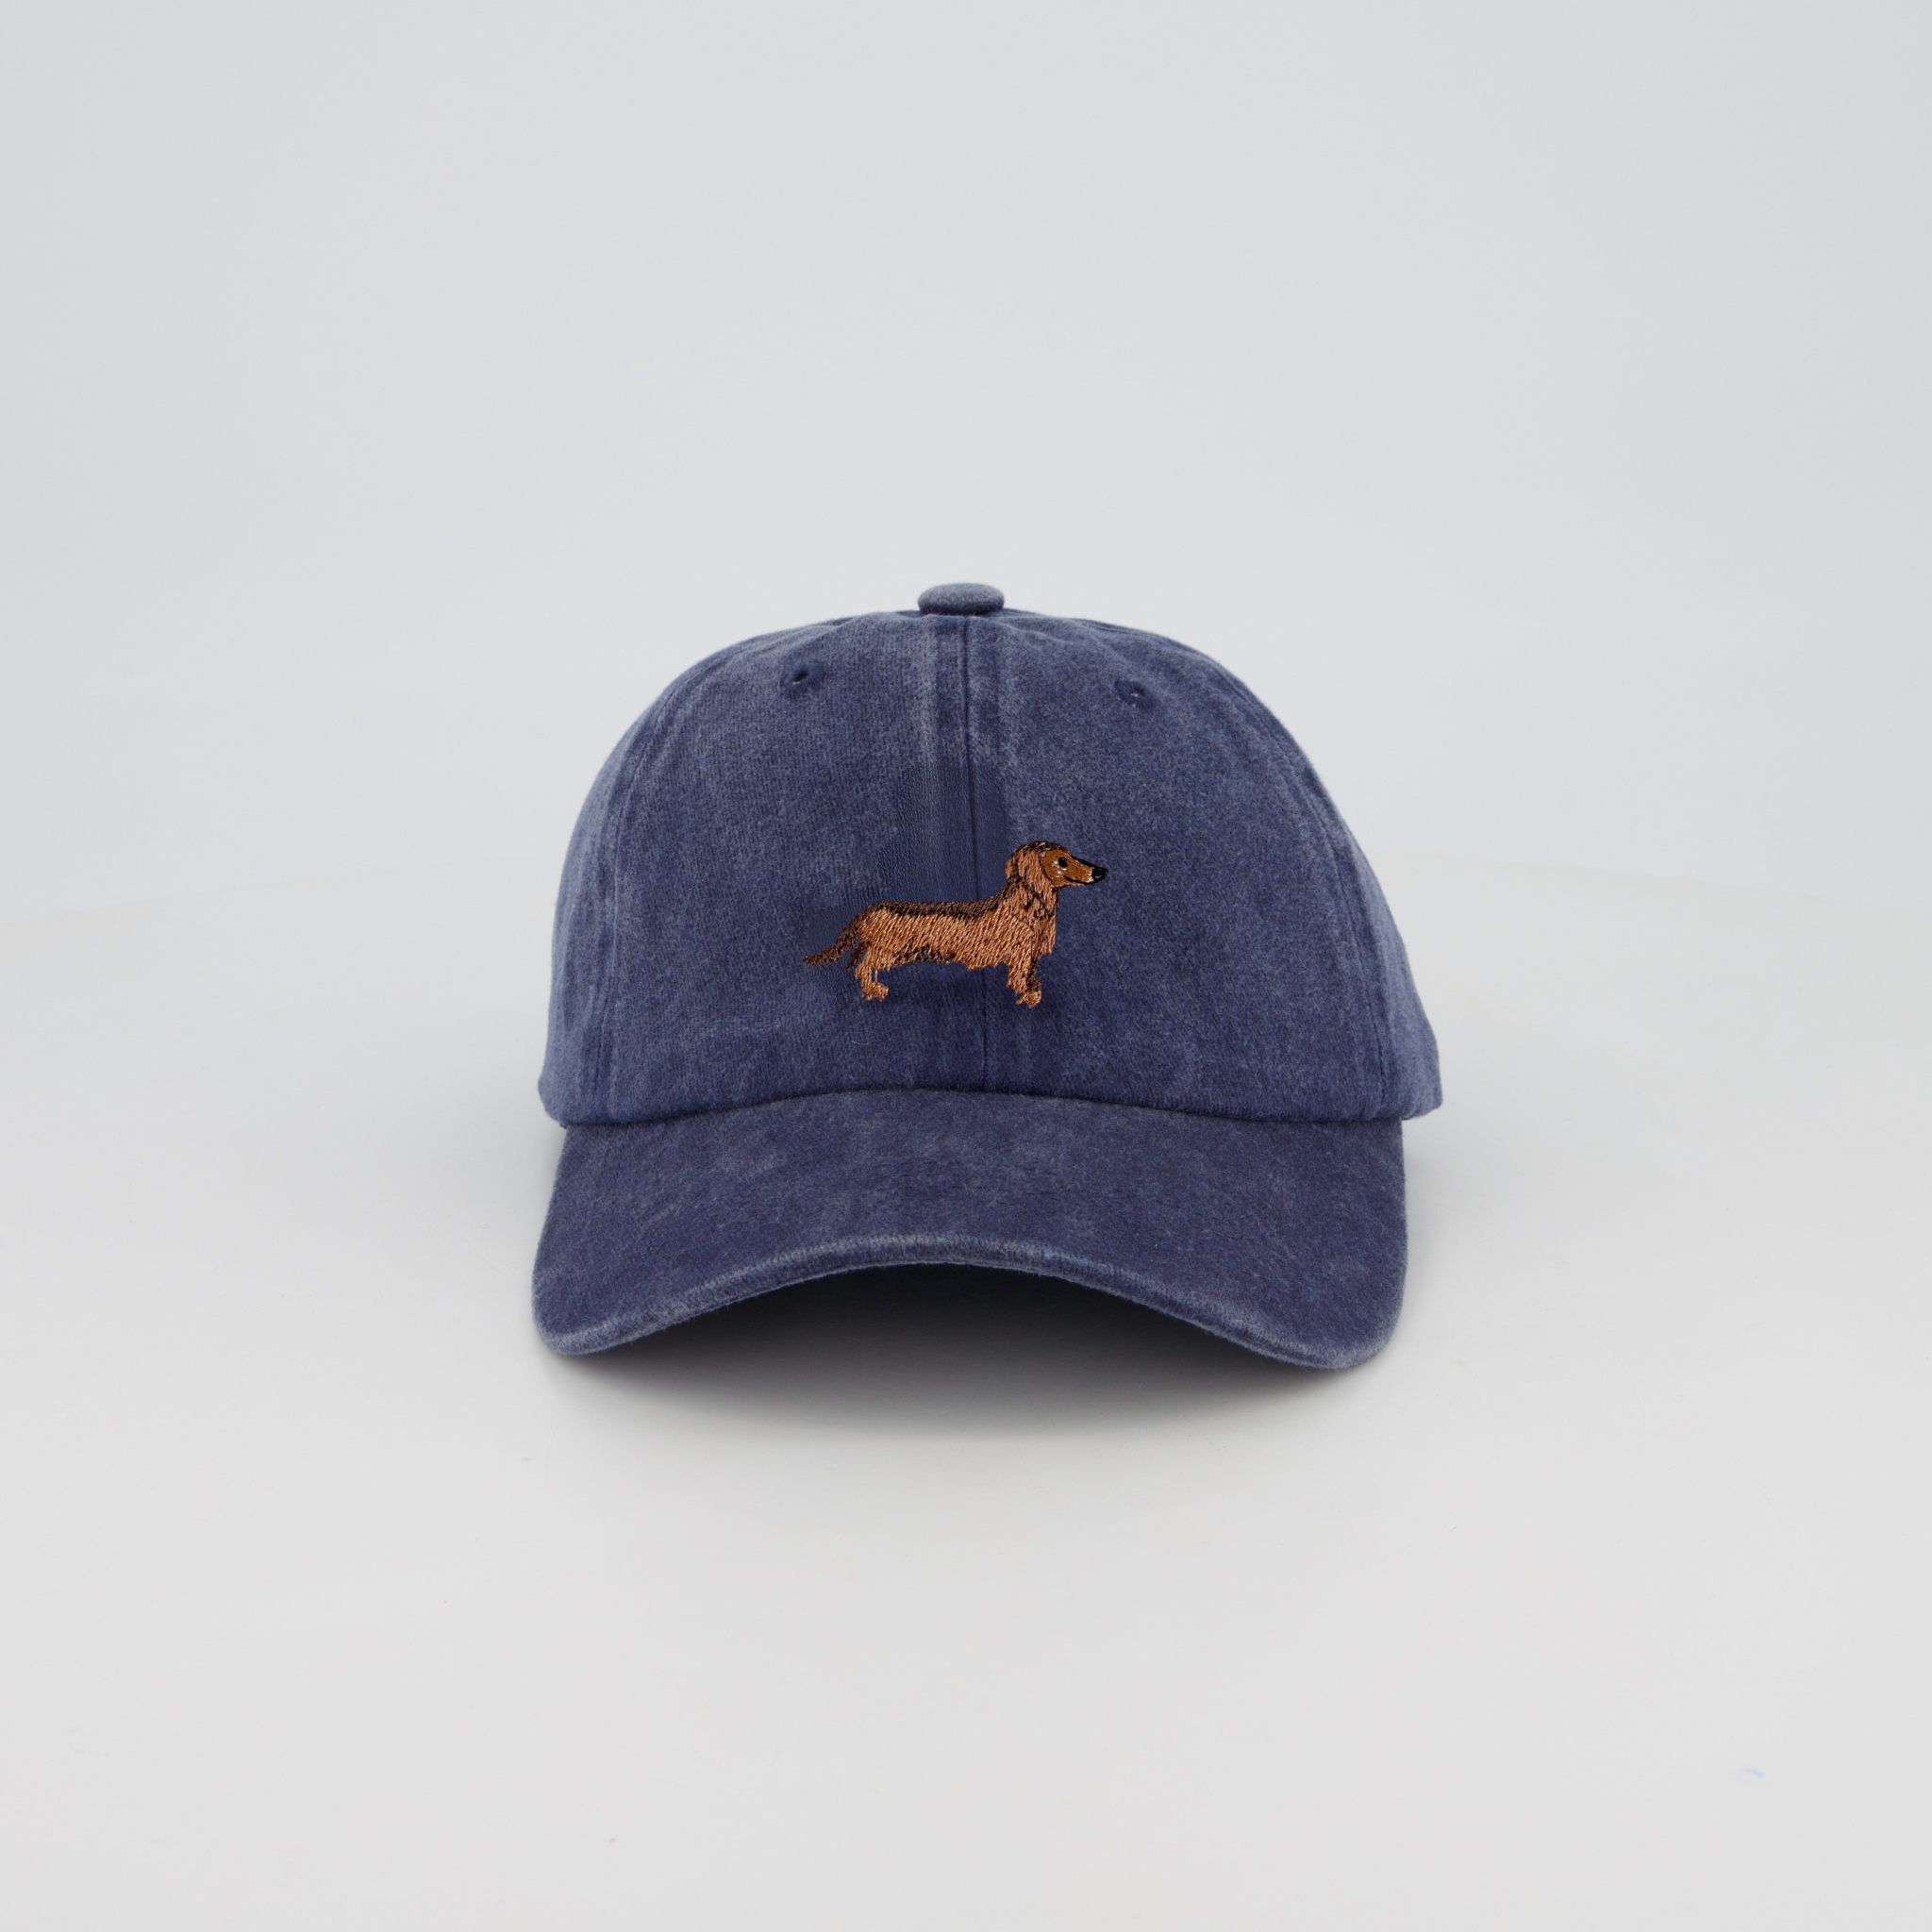 Personalised Hat with Hand-drawn Dachshund Embroidery Design